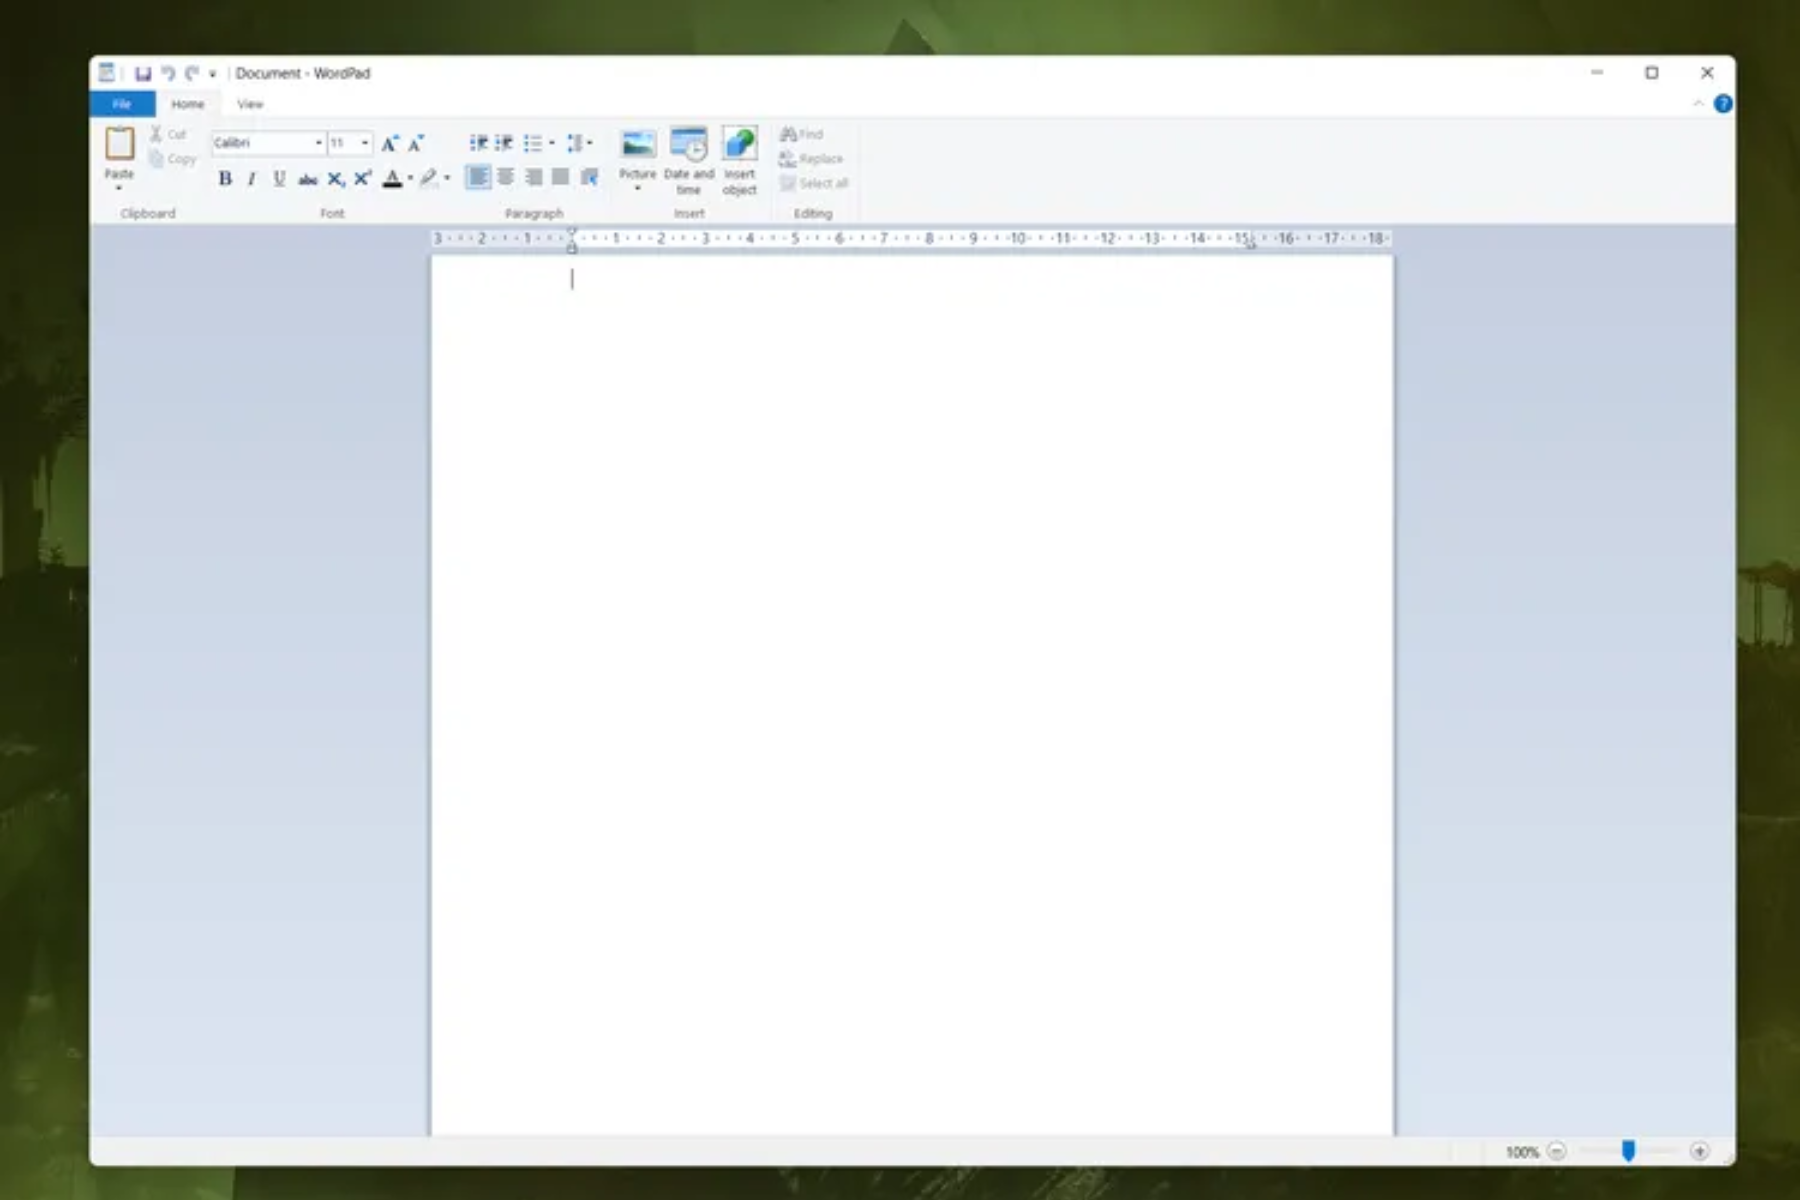 WordPad hasn’t been updated significantly since Windows 8